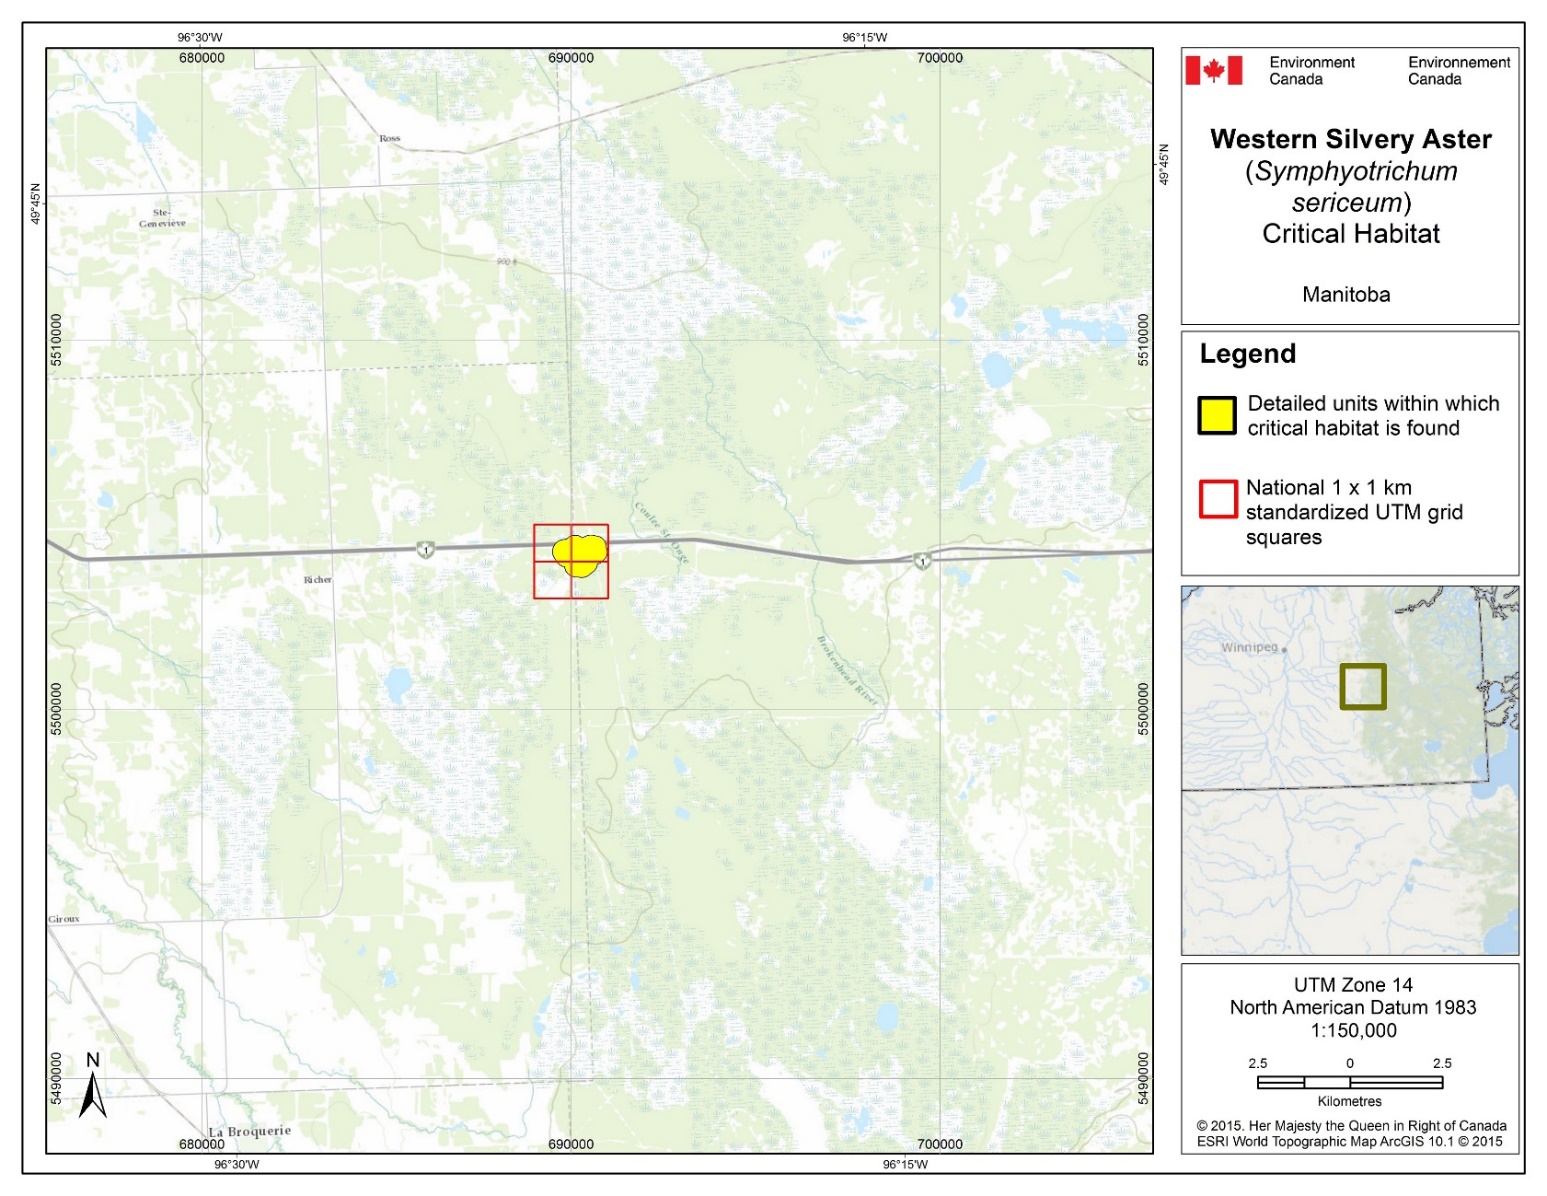 Figure B4: Map of Critical habitat for Western Silvery Aster in Manitoba